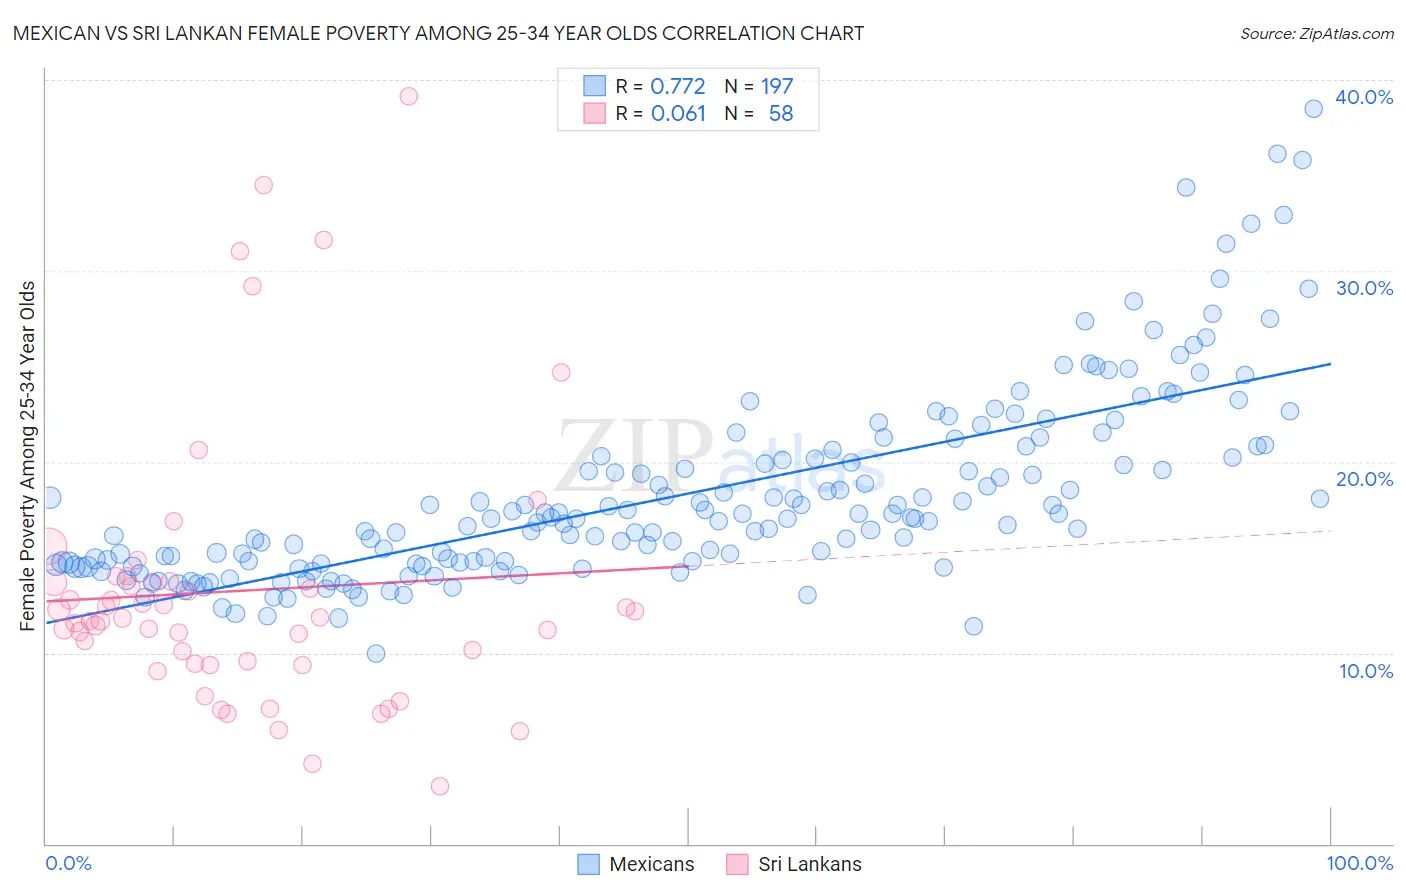 Mexican vs Sri Lankan Female Poverty Among 25-34 Year Olds